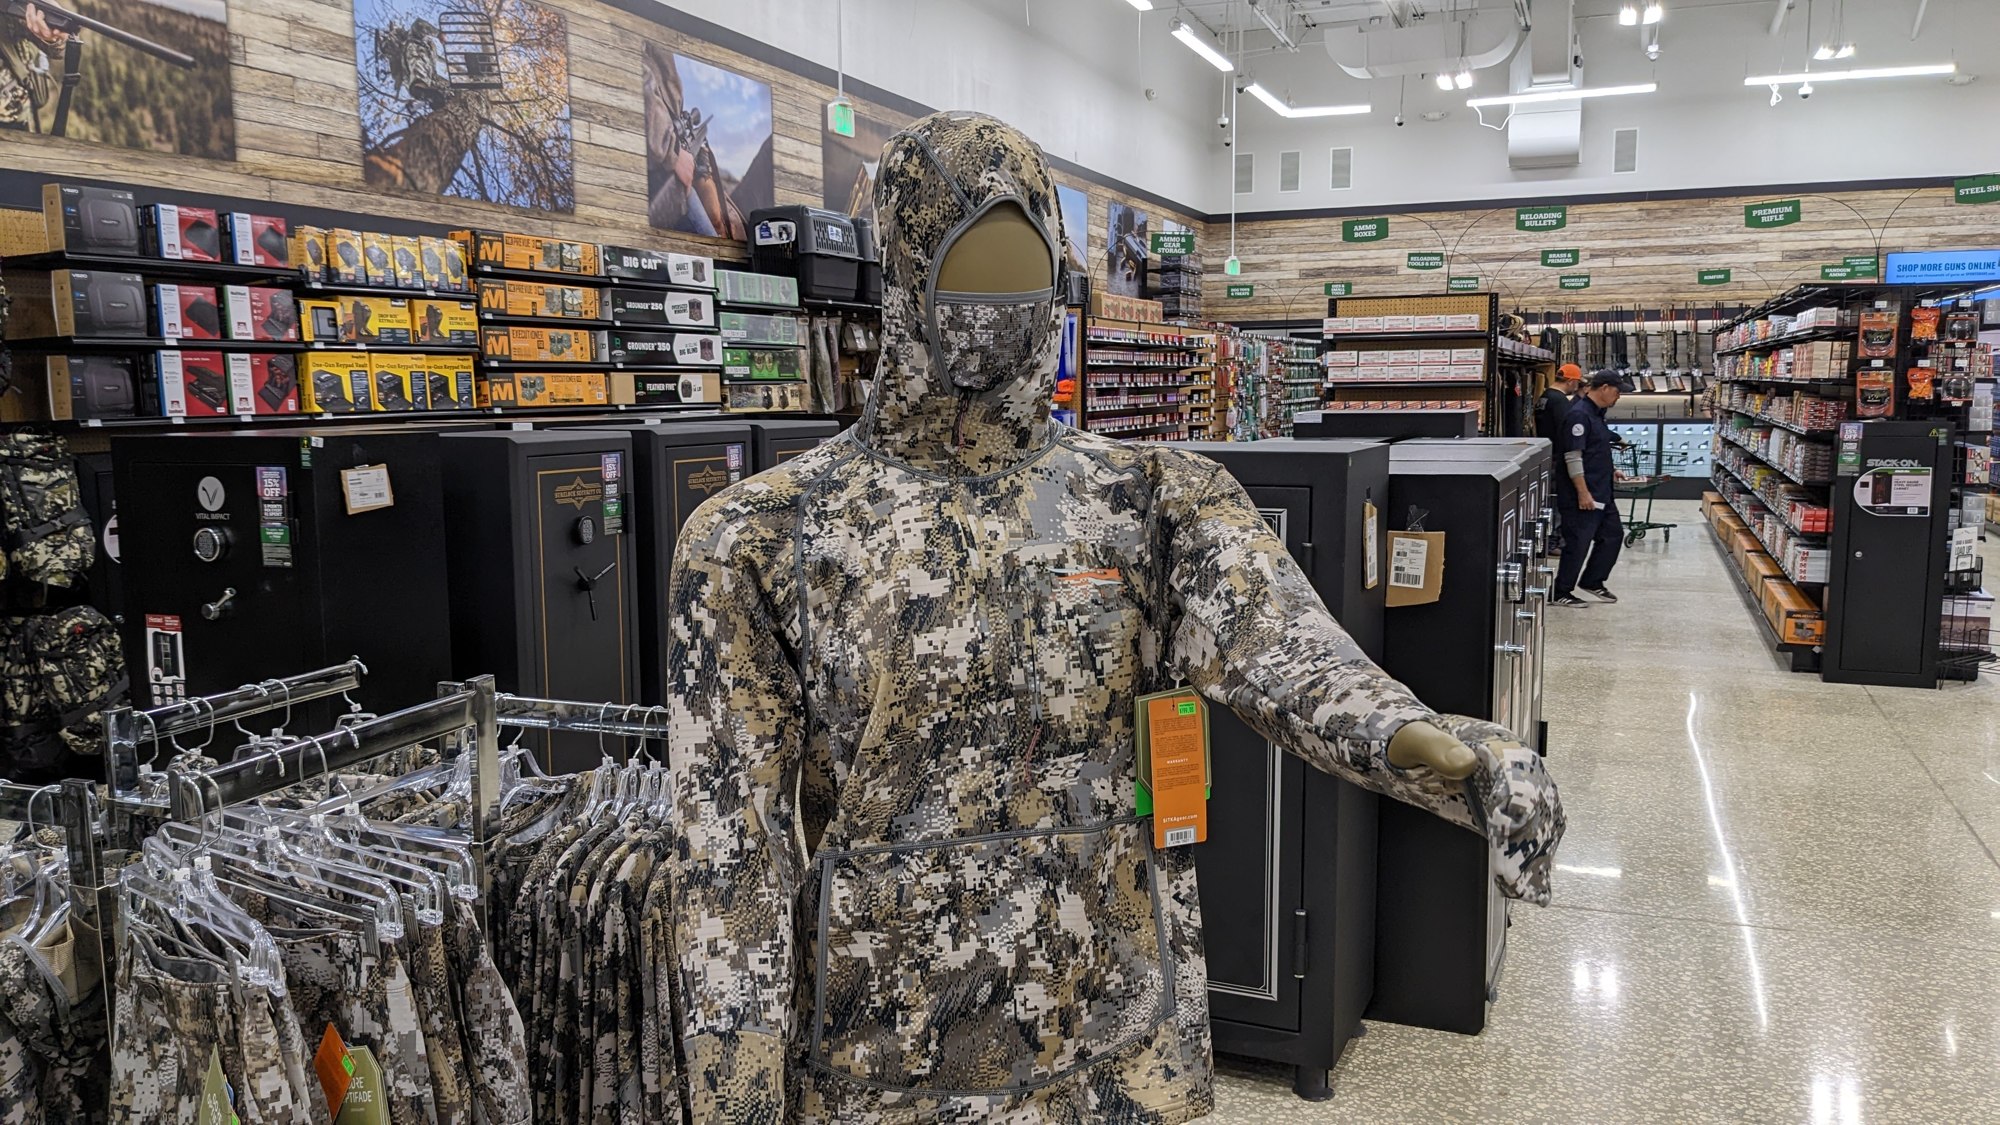 Hunting, shooting, fishing, and camping gear are available.